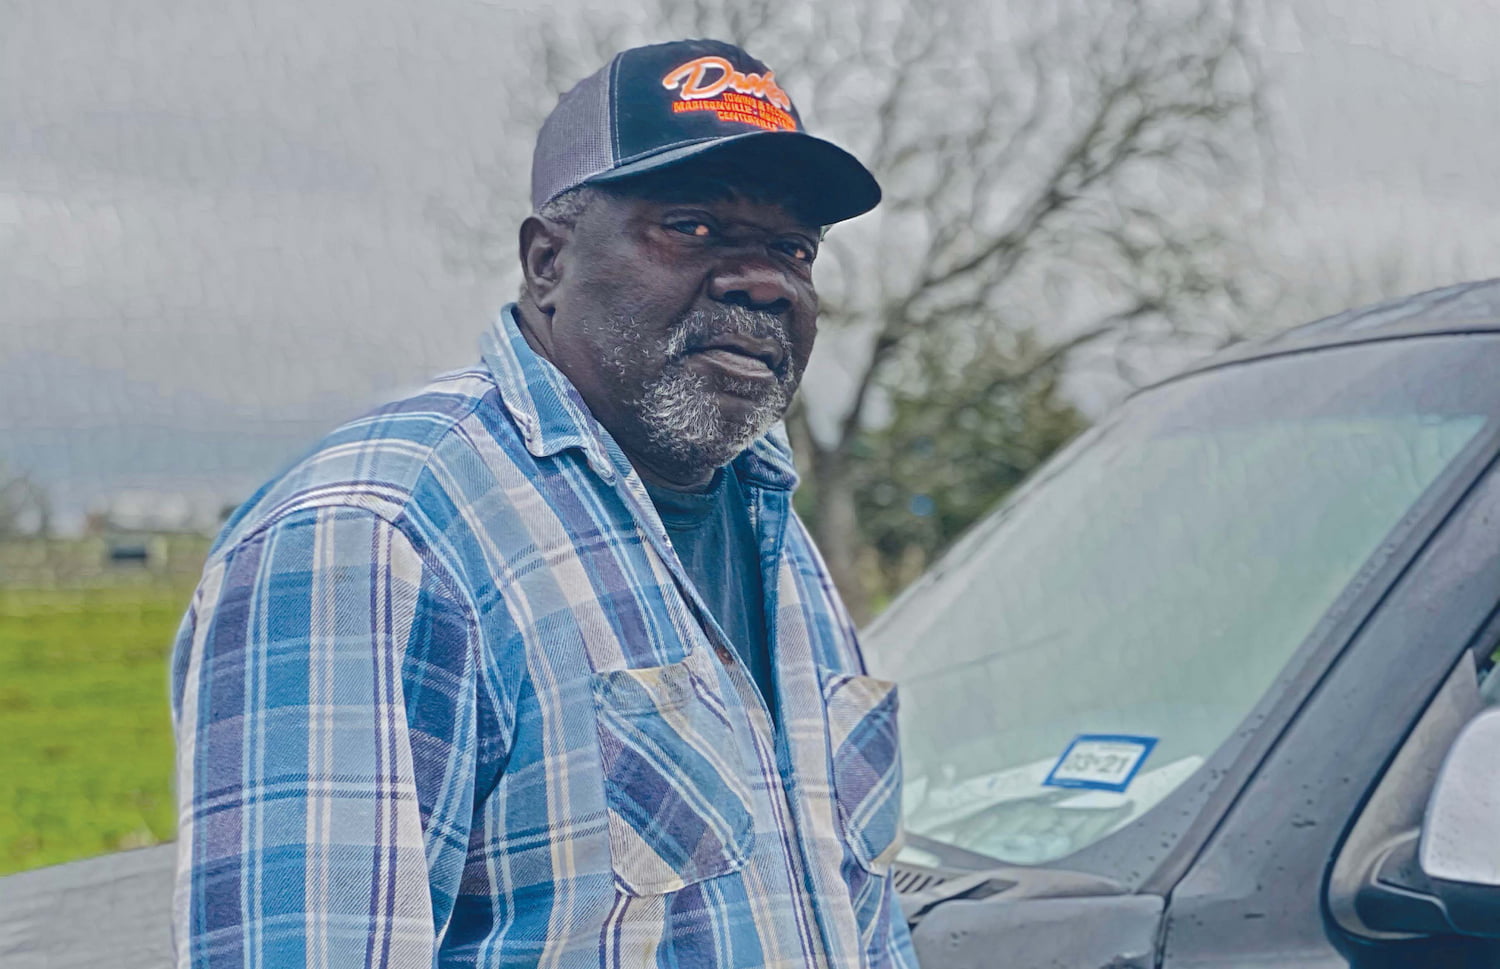 George Dunn stands next to his pickup truck in overcast weather. He wears a baseball cap and a button up shirt.